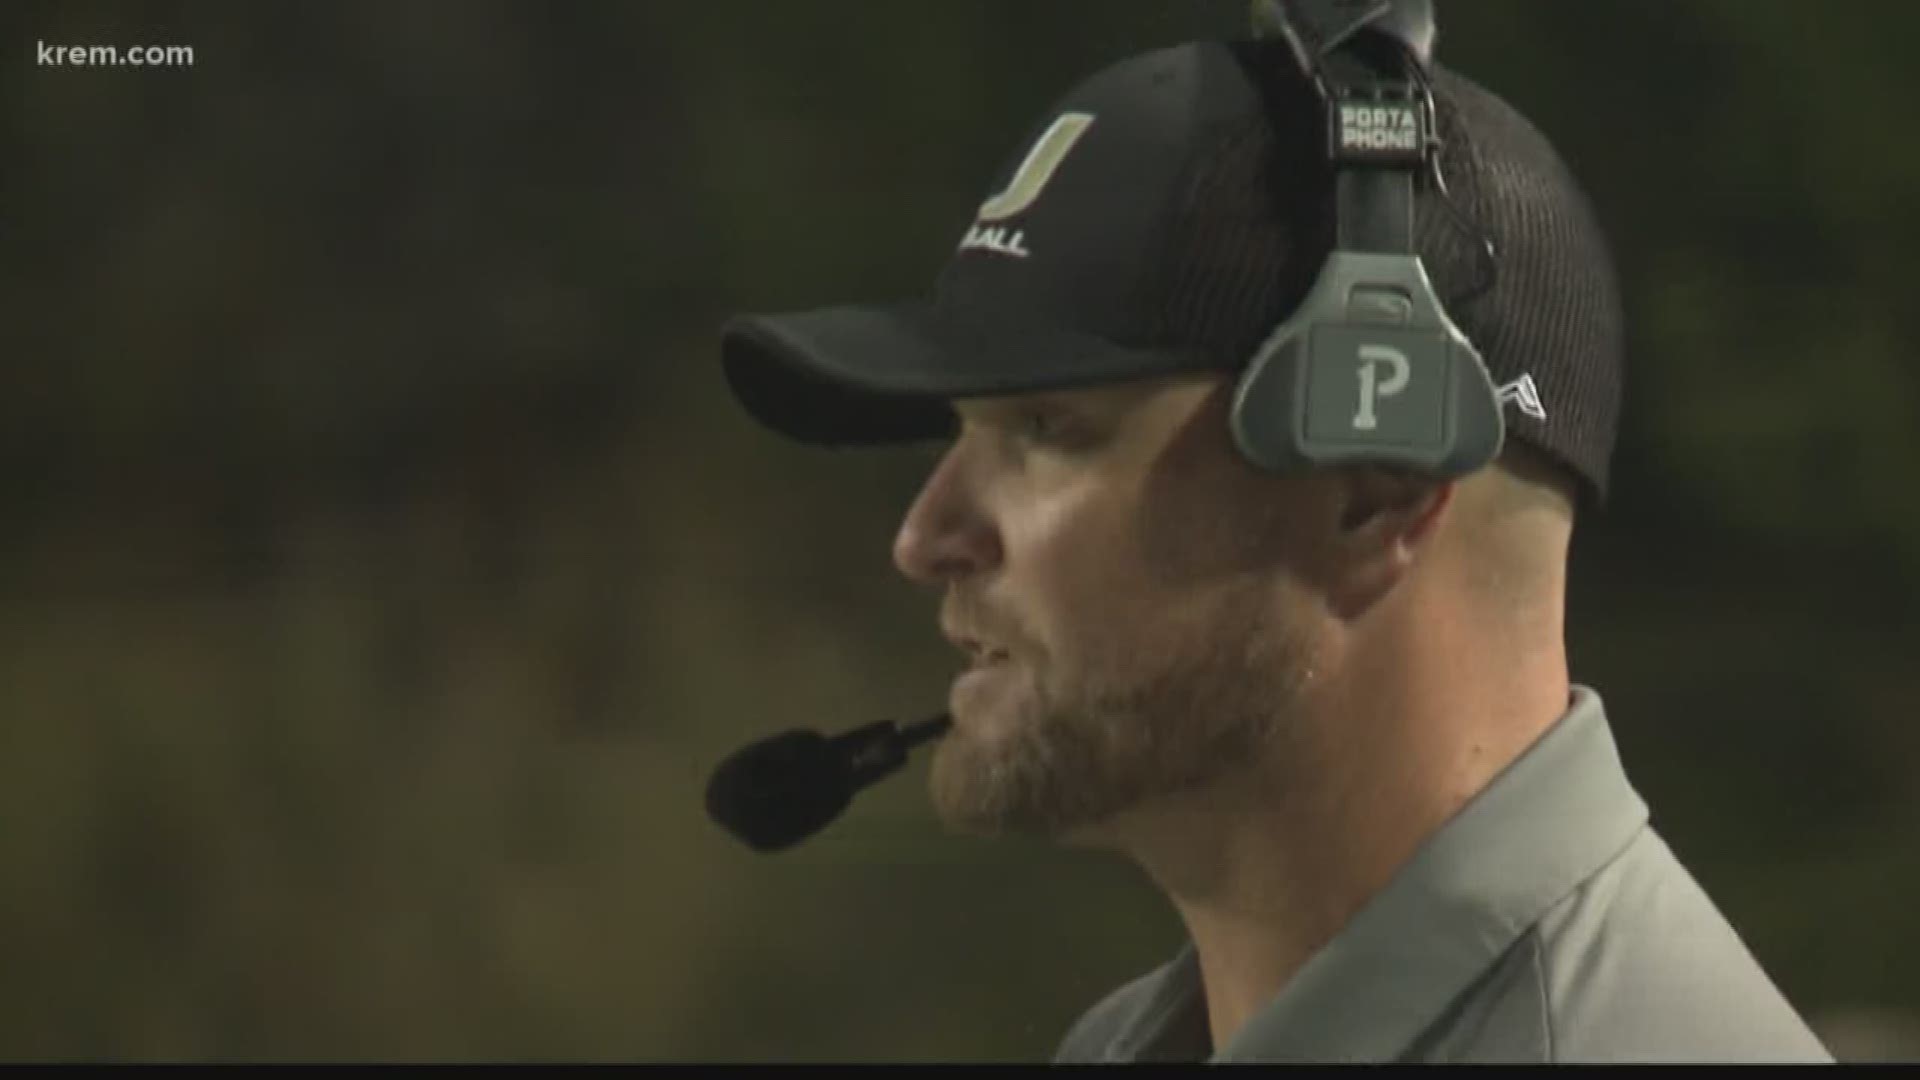 Hear what coach Adam Daniel has to say on the sidelines during University's 33-0 win over Rogers.